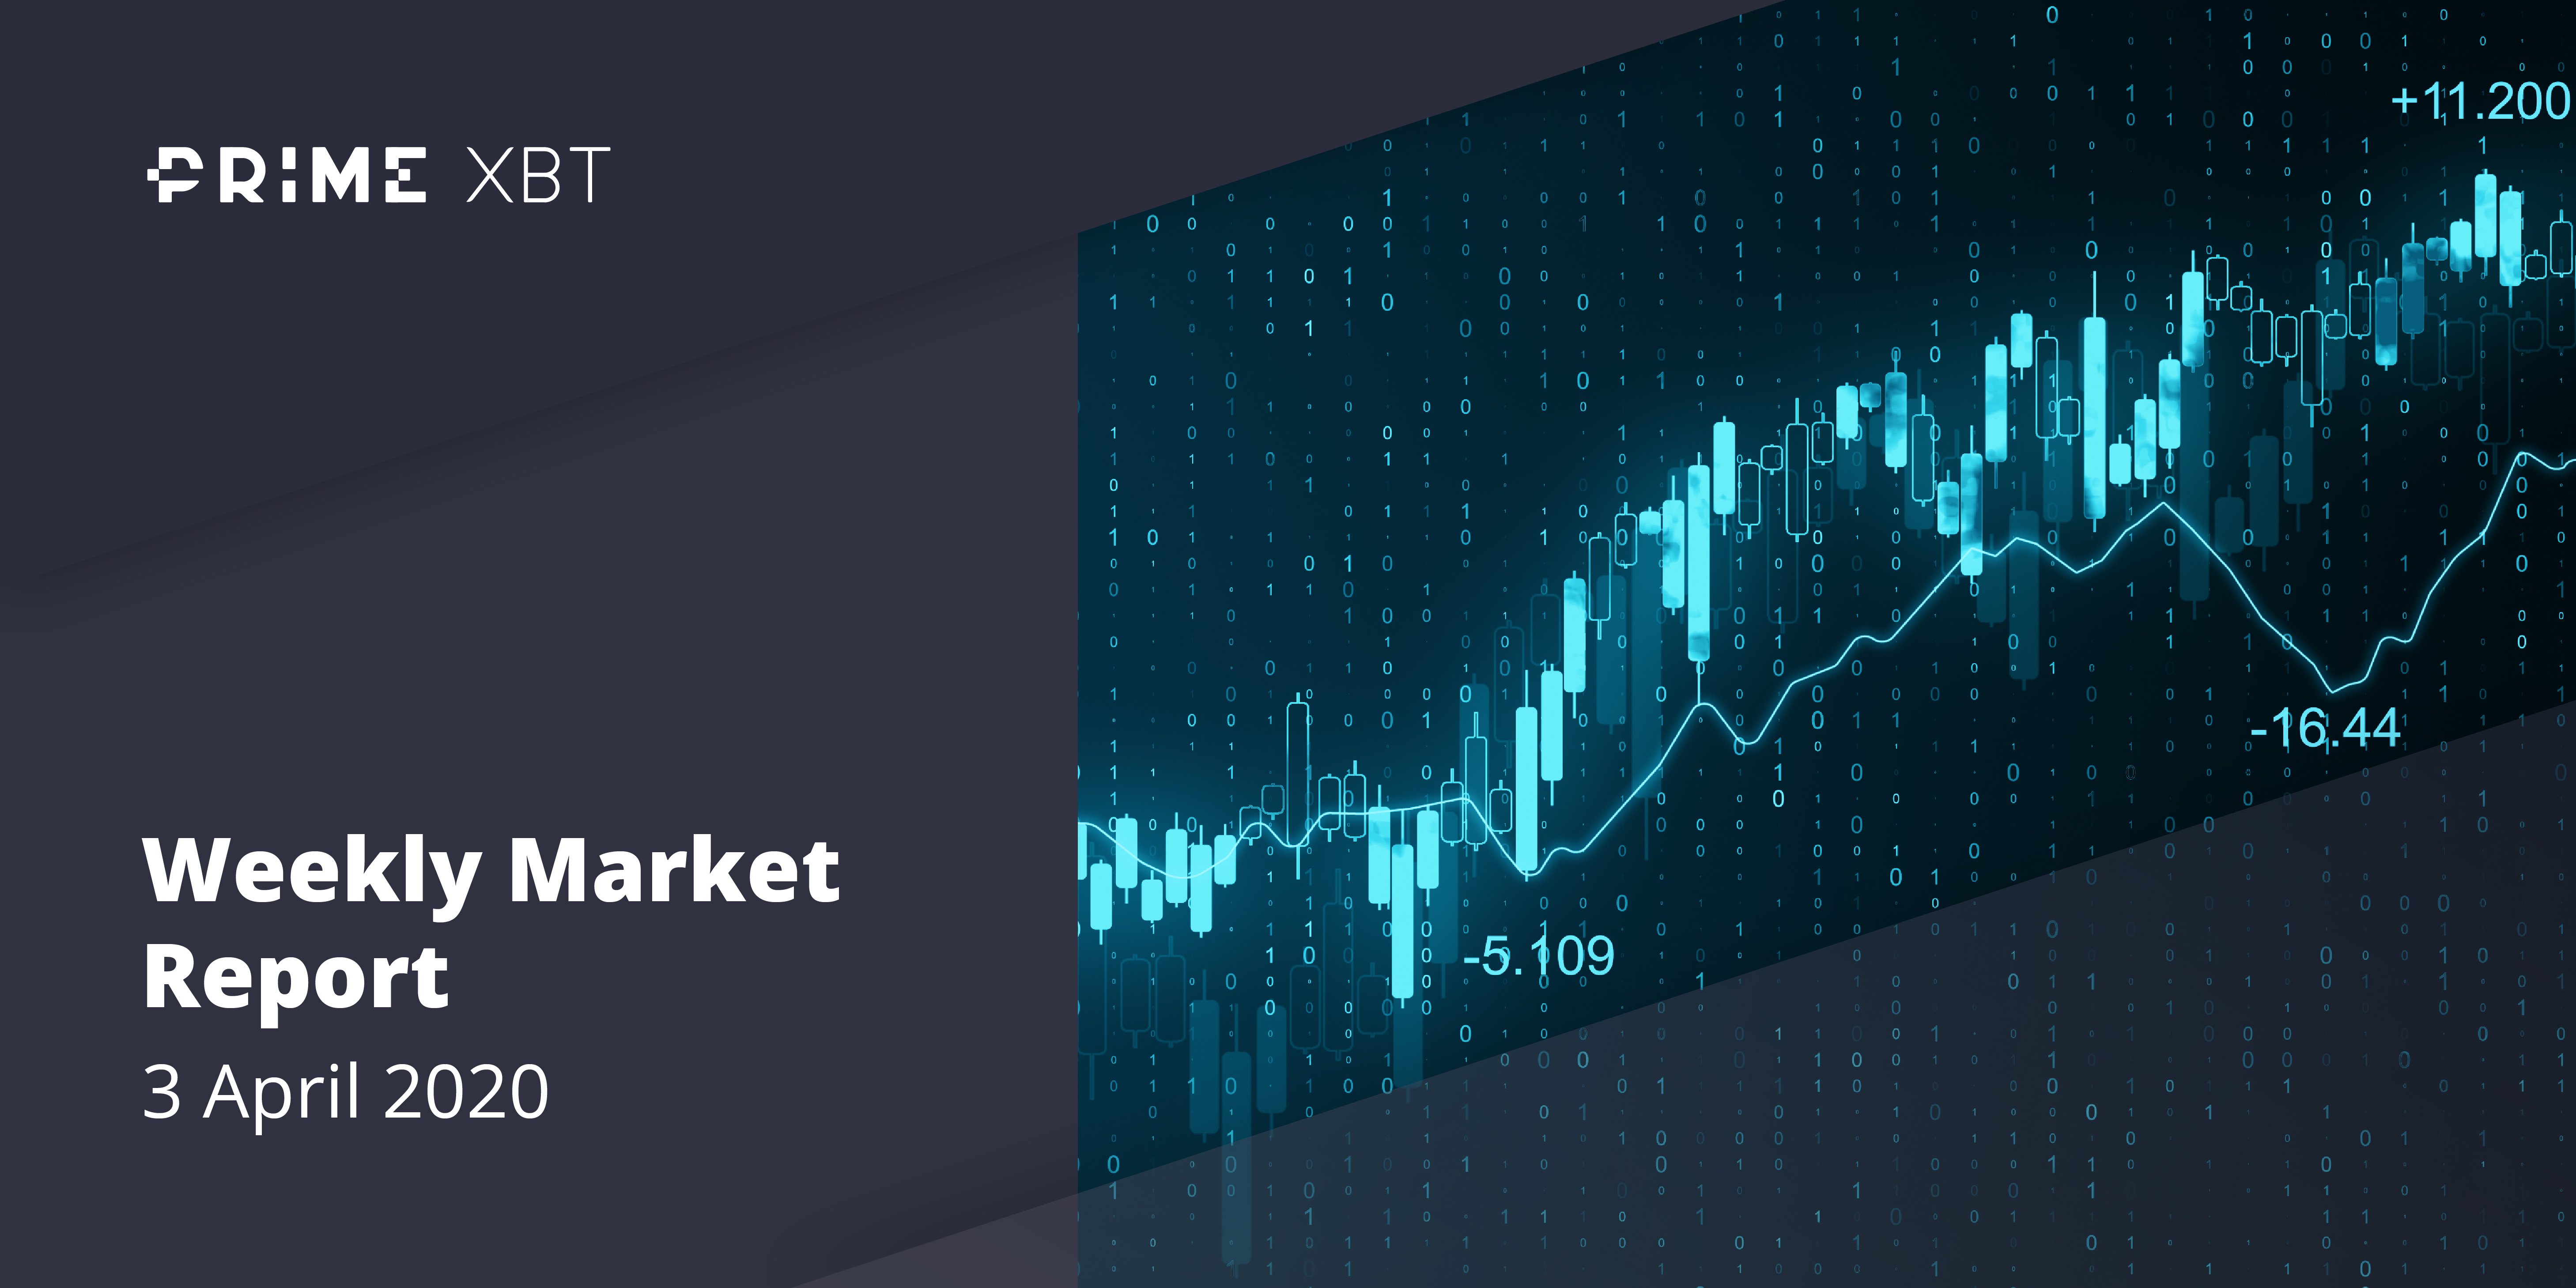 Crypto Market Report: Bitcoin Makes Gains into April But Volume Drops, Futures Markets Recovers - 2020 04 04 03.14.57